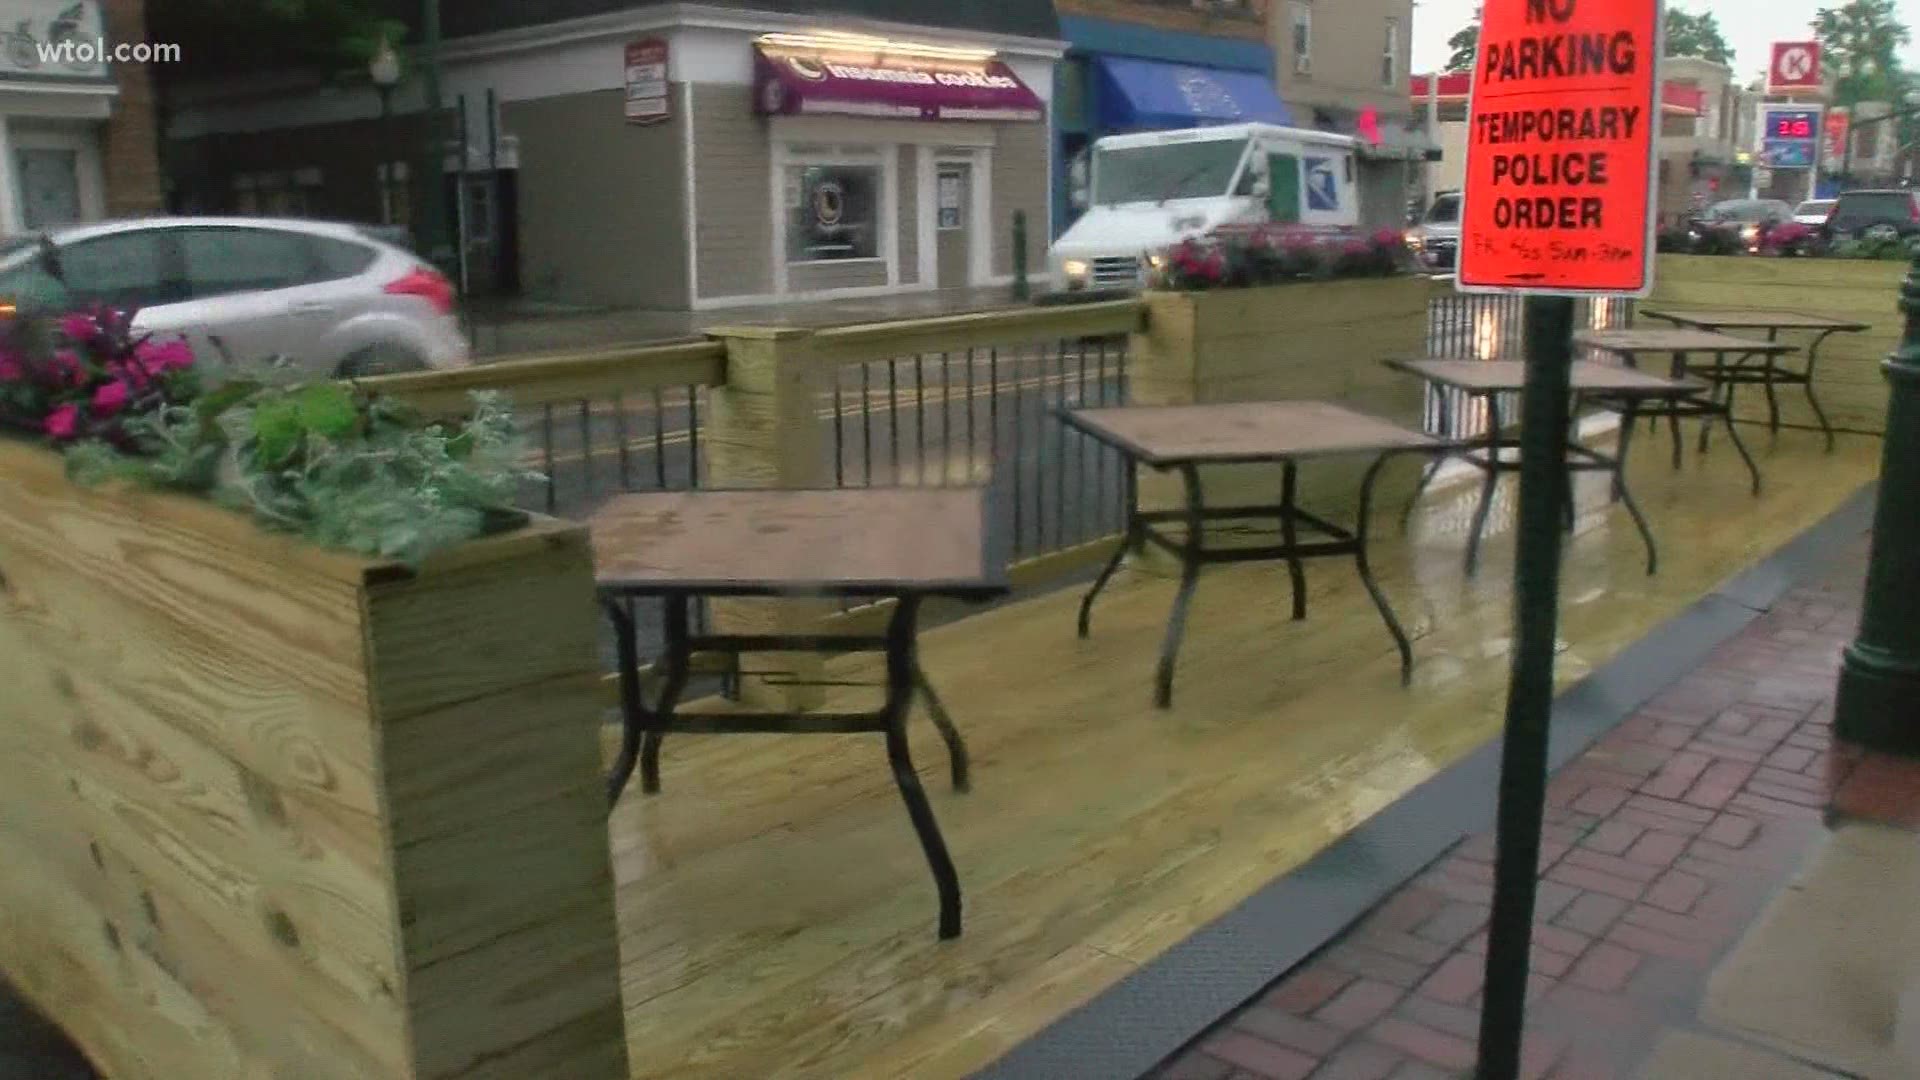 Parklets are on-street dining decks that convert a single parking space into usable space for businesses.